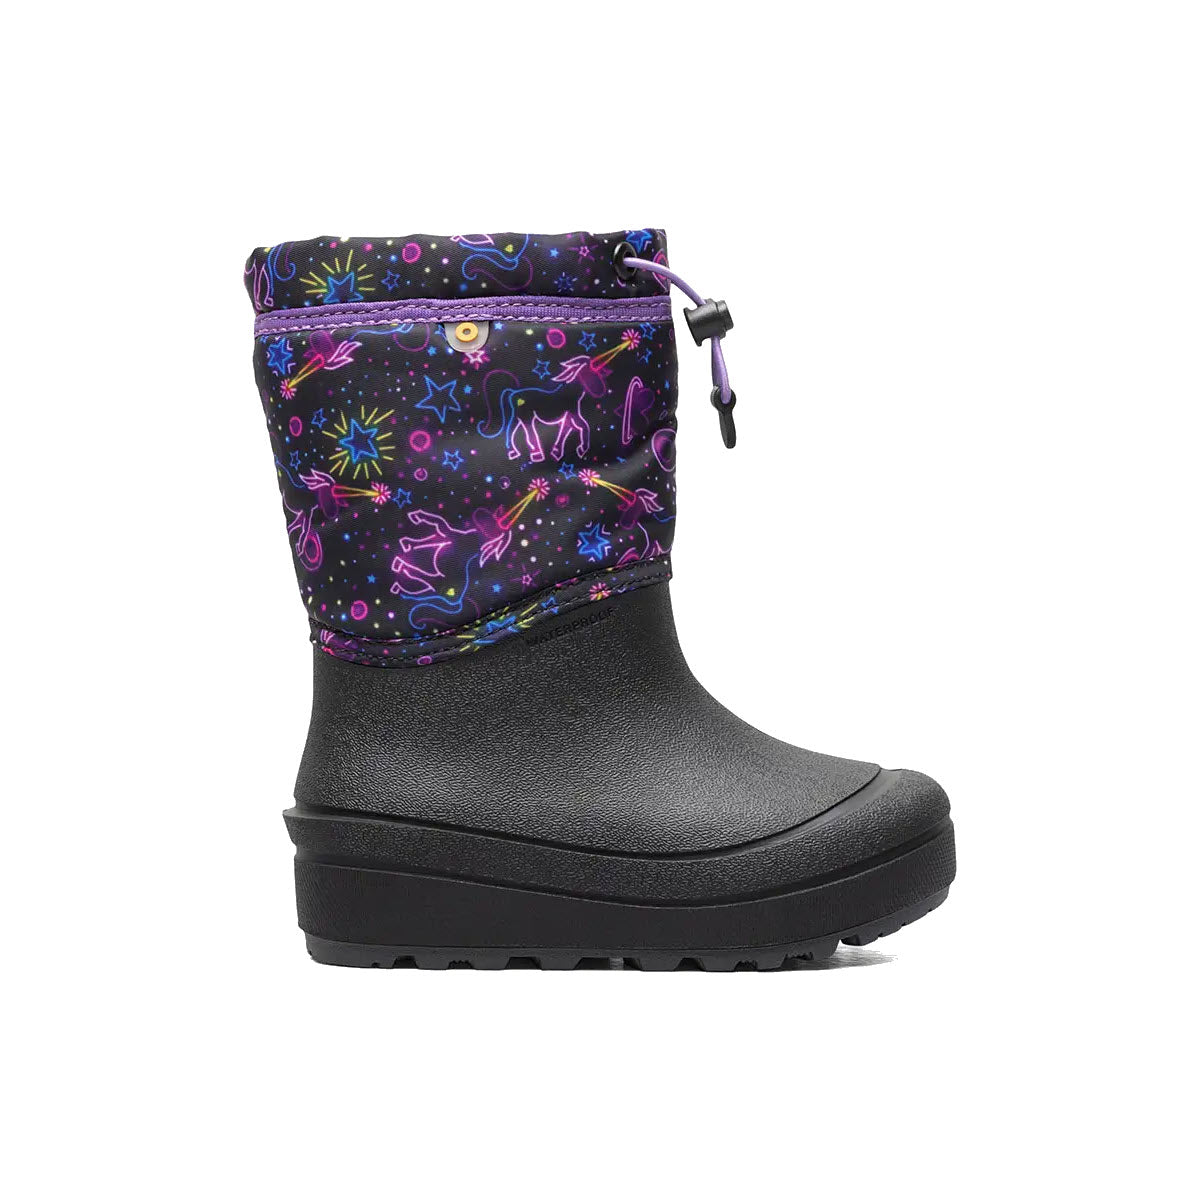 A single black winter boot with a colorful, patterned upper featuring animal and star designs, displayed against a white background. Ideal for kids as snow boots. - *Bogs Snow Shell Neon Unicorn Purple Multi - Kids* by Bogs